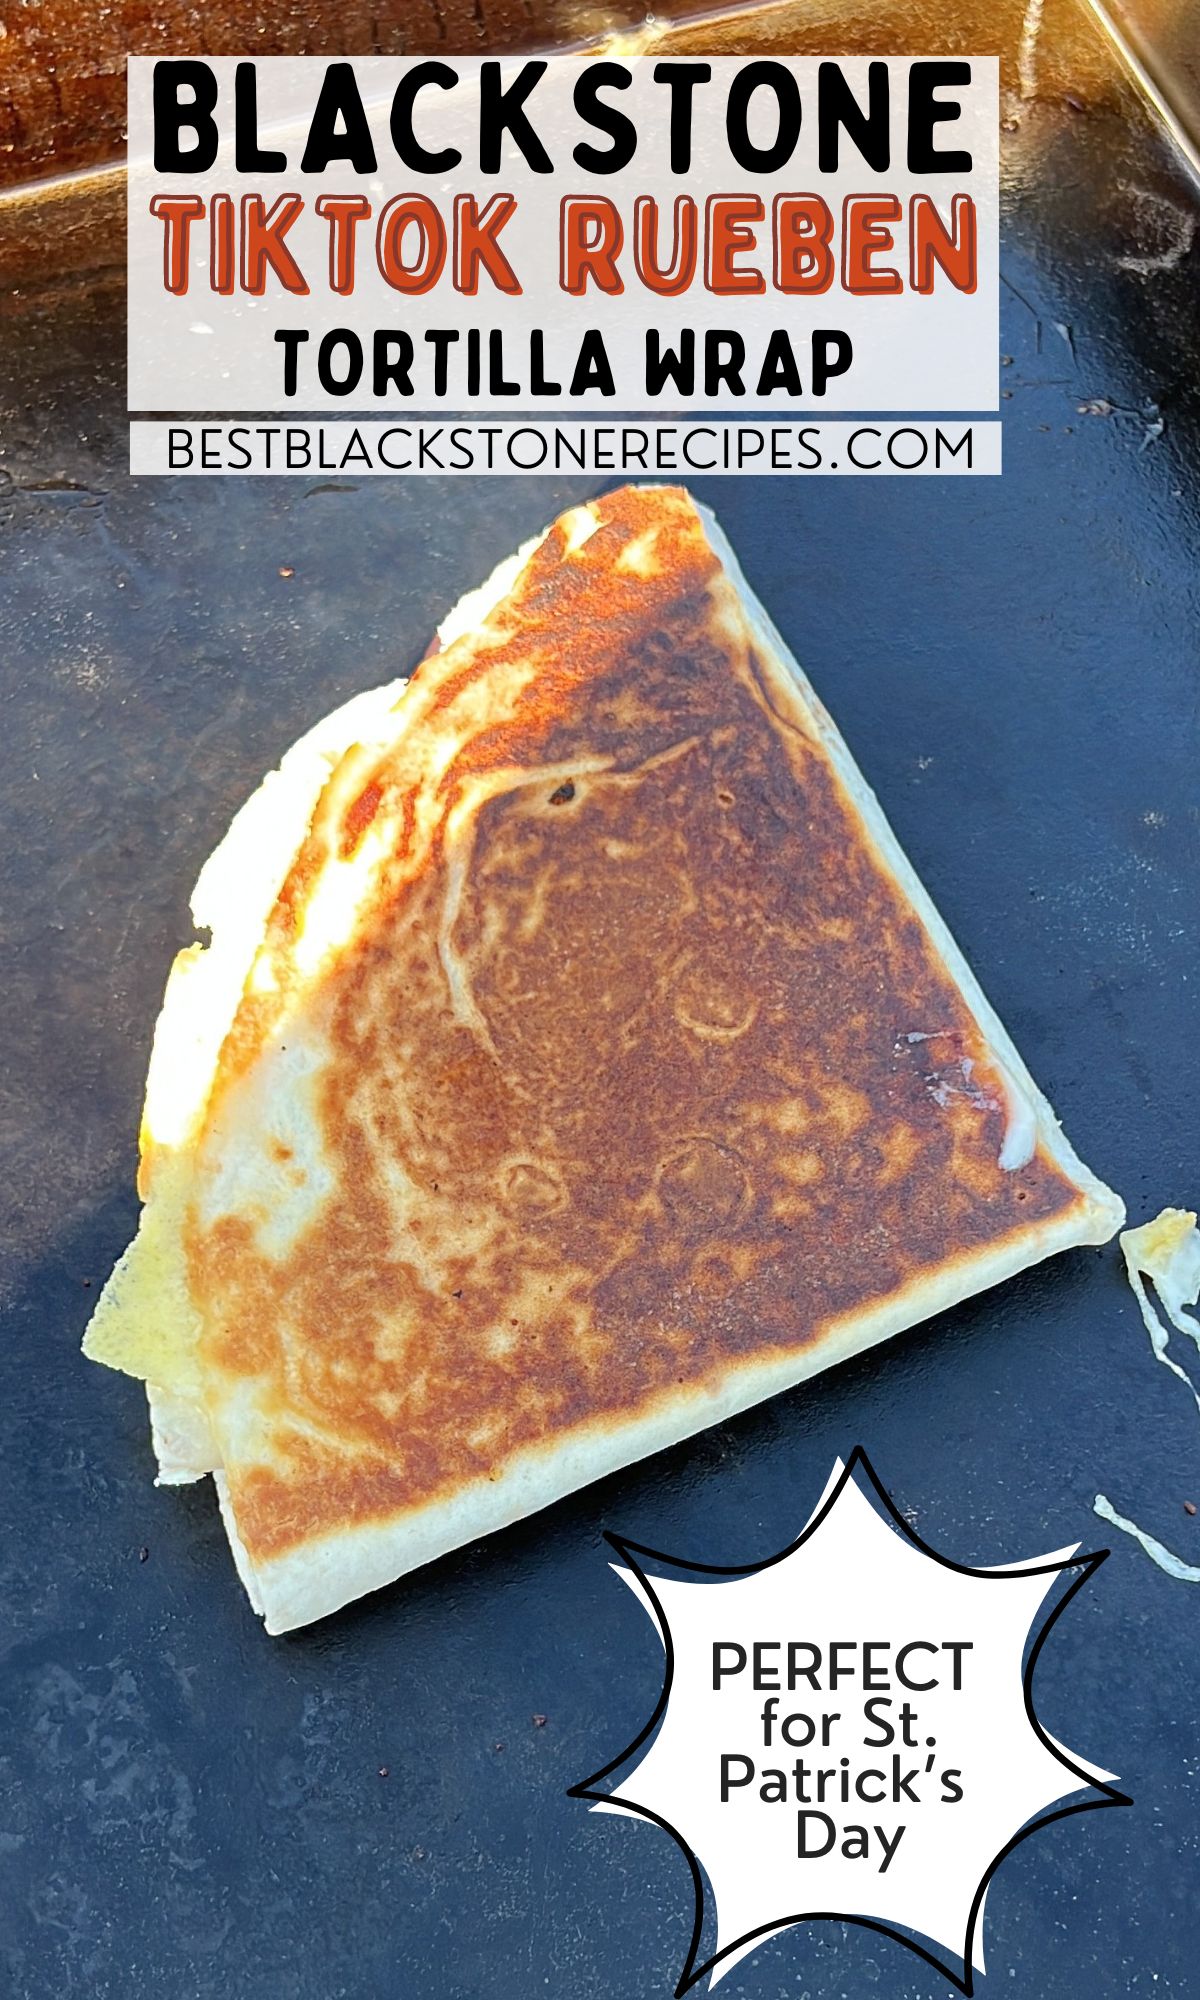 A crispy tortilla wrap labeled as "blackstone tiktok reuben tortilla wrap" from bestblackstonerecipes.com, recommended for st. patrick's day.